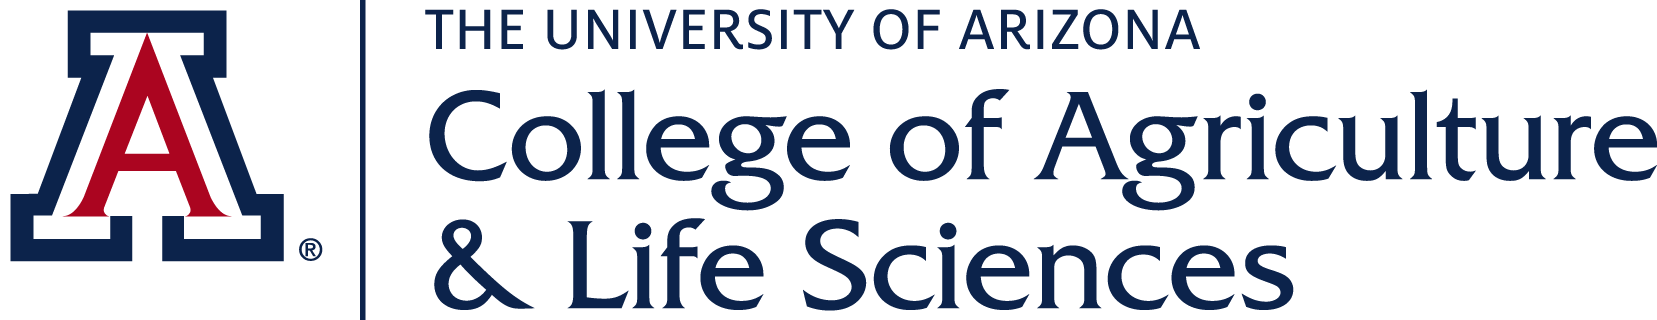 University of Arizona College of Agriculture and Life Sciences